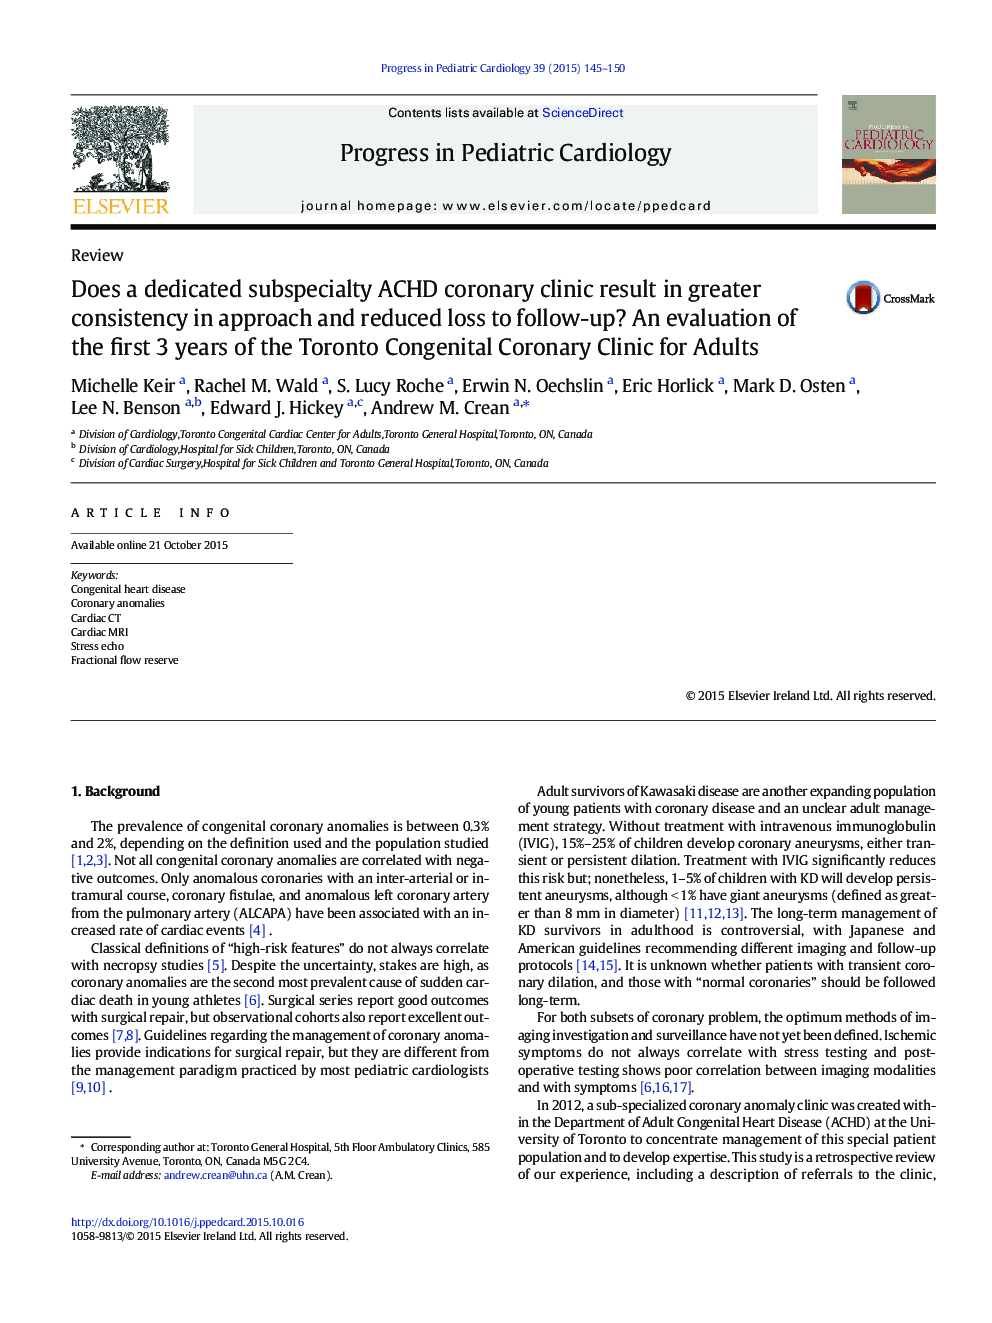 Does a dedicated subspecialty ACHD coronary clinic result in greater consistency in approach and reduced loss to follow-up? An evaluation of the first 3Â years of the Toronto Congenital Coronary Clinic for Adults